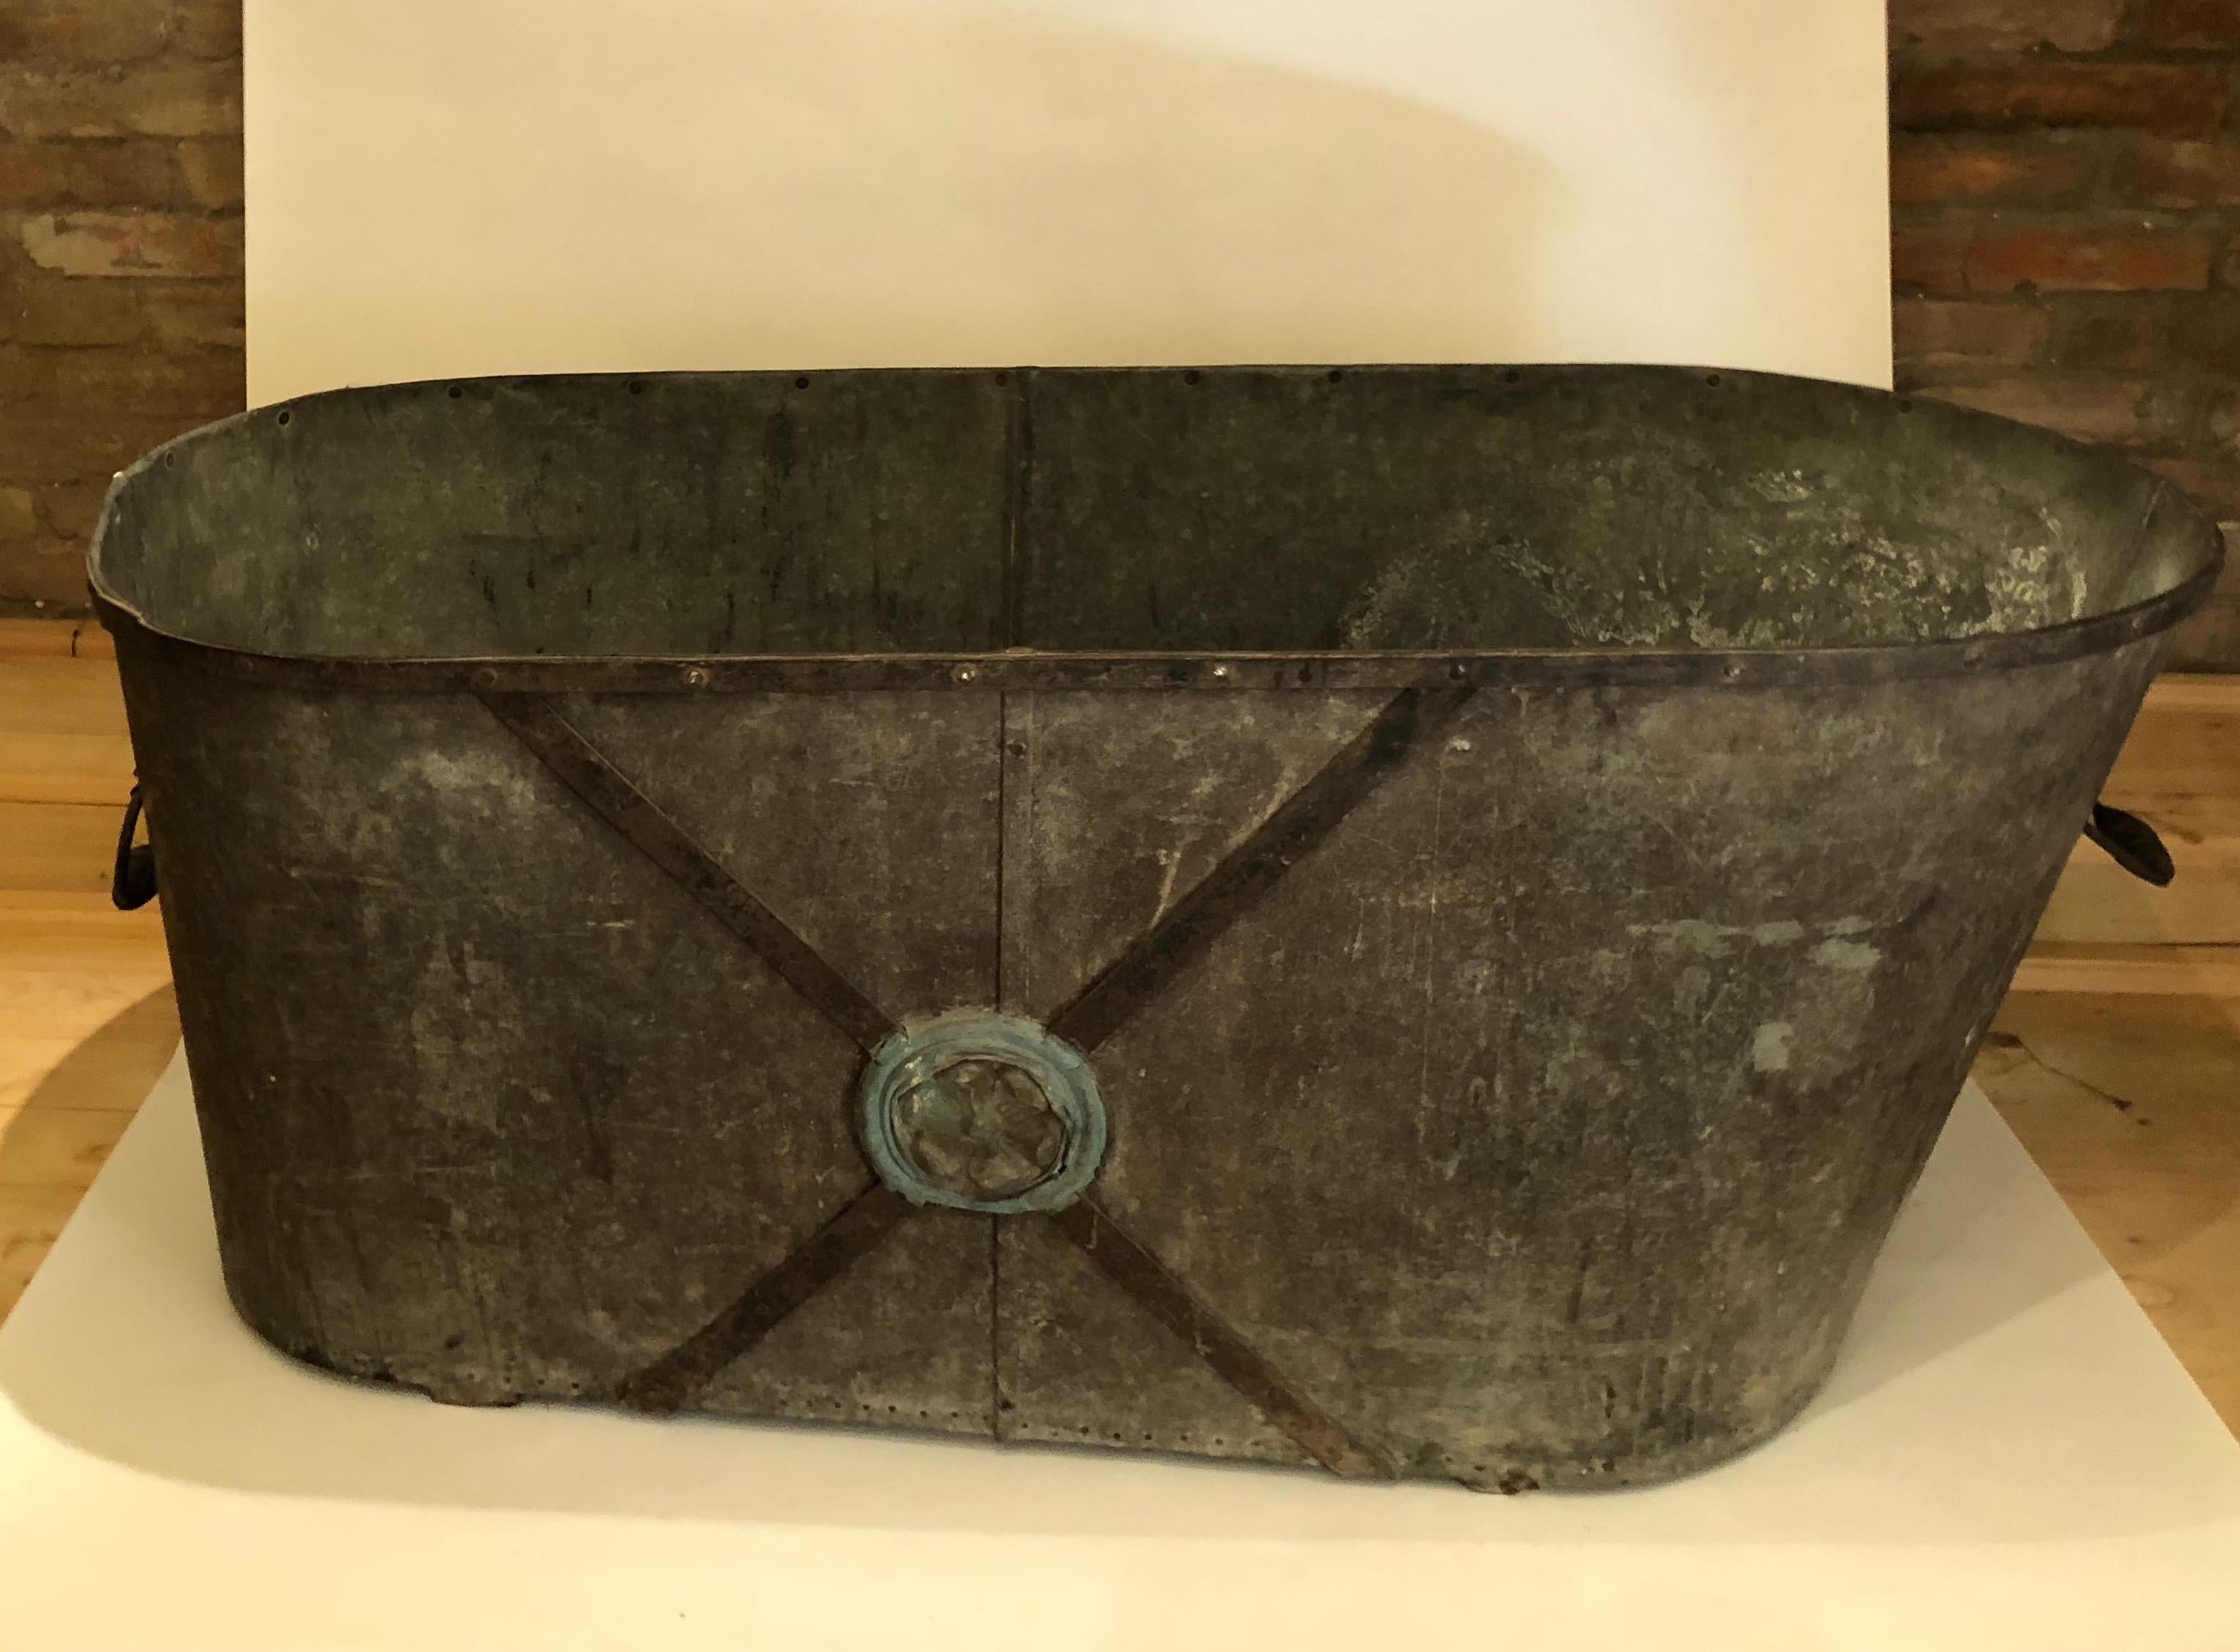 This French zinc bathtub is in original condition: without a drainage hole, with a wood subframe, two handles and beautiful blue painting and decoration on both sides. Seems to be watertight.
The piece has a solid construction and would need just a